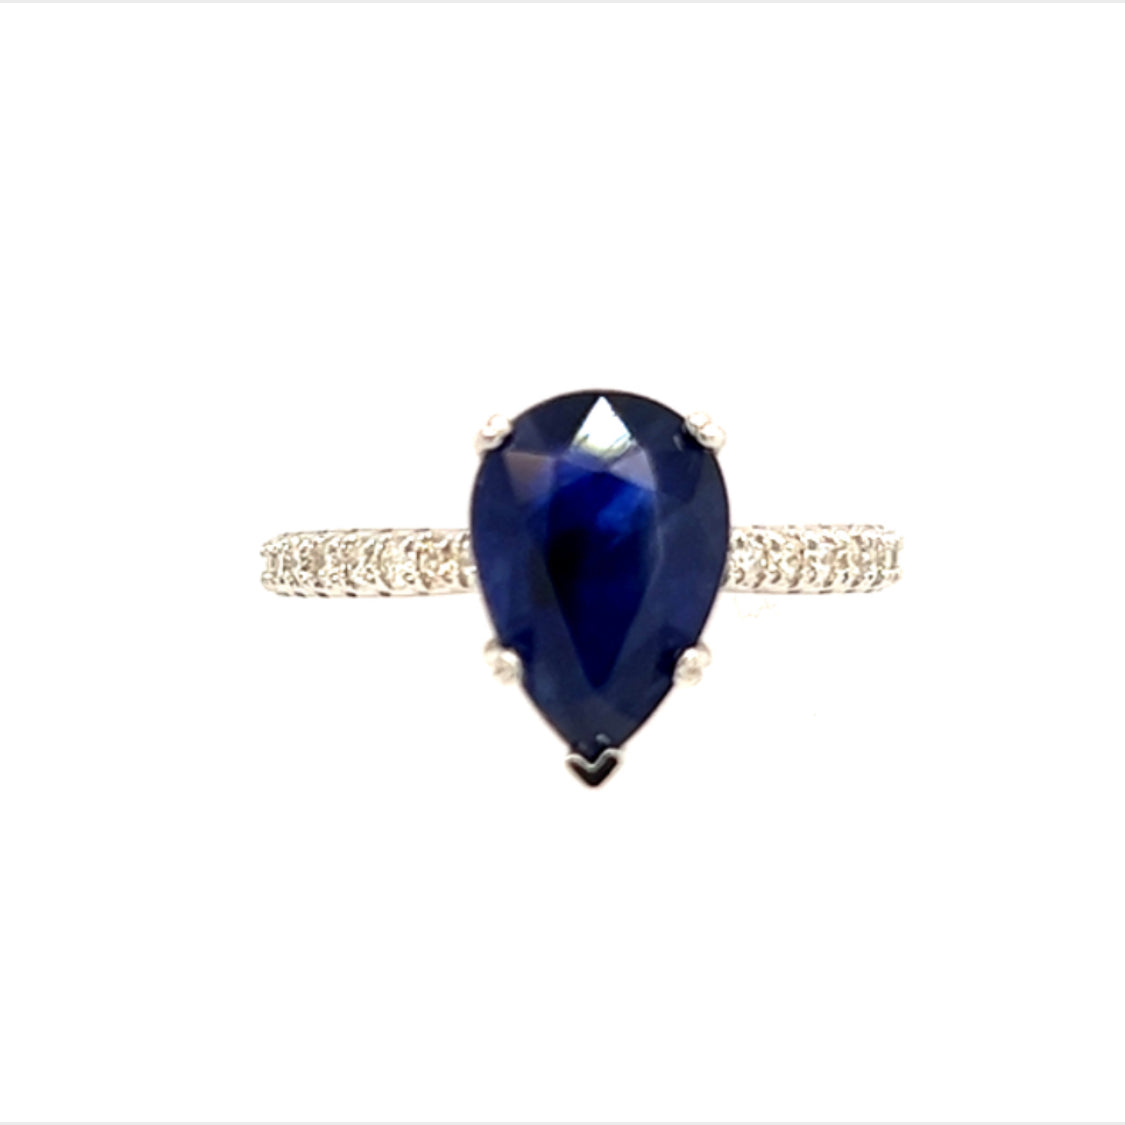 Composite Sapphire Diamond Ring 14k Gold 2.77 TCW Certified $2,675 215415